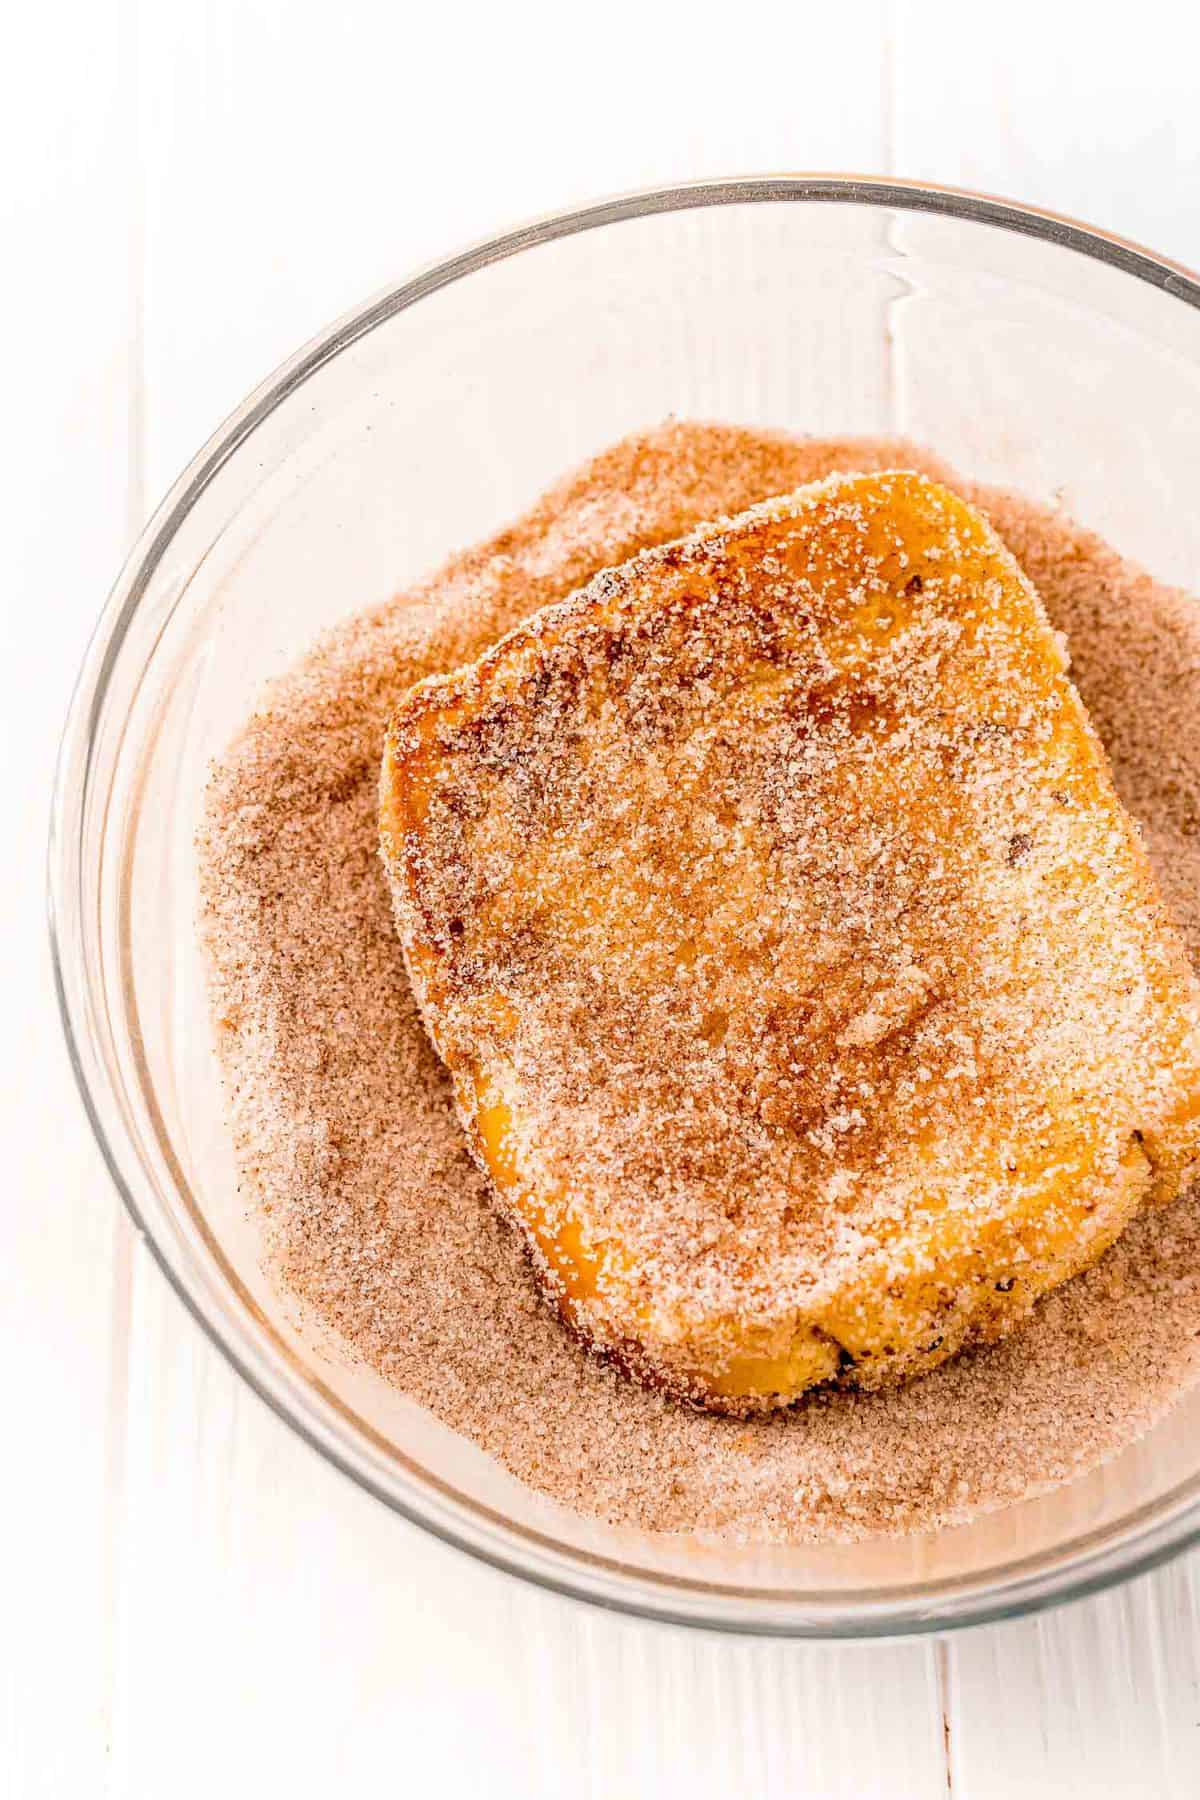 French toast being dipped in cinnamon sugar.